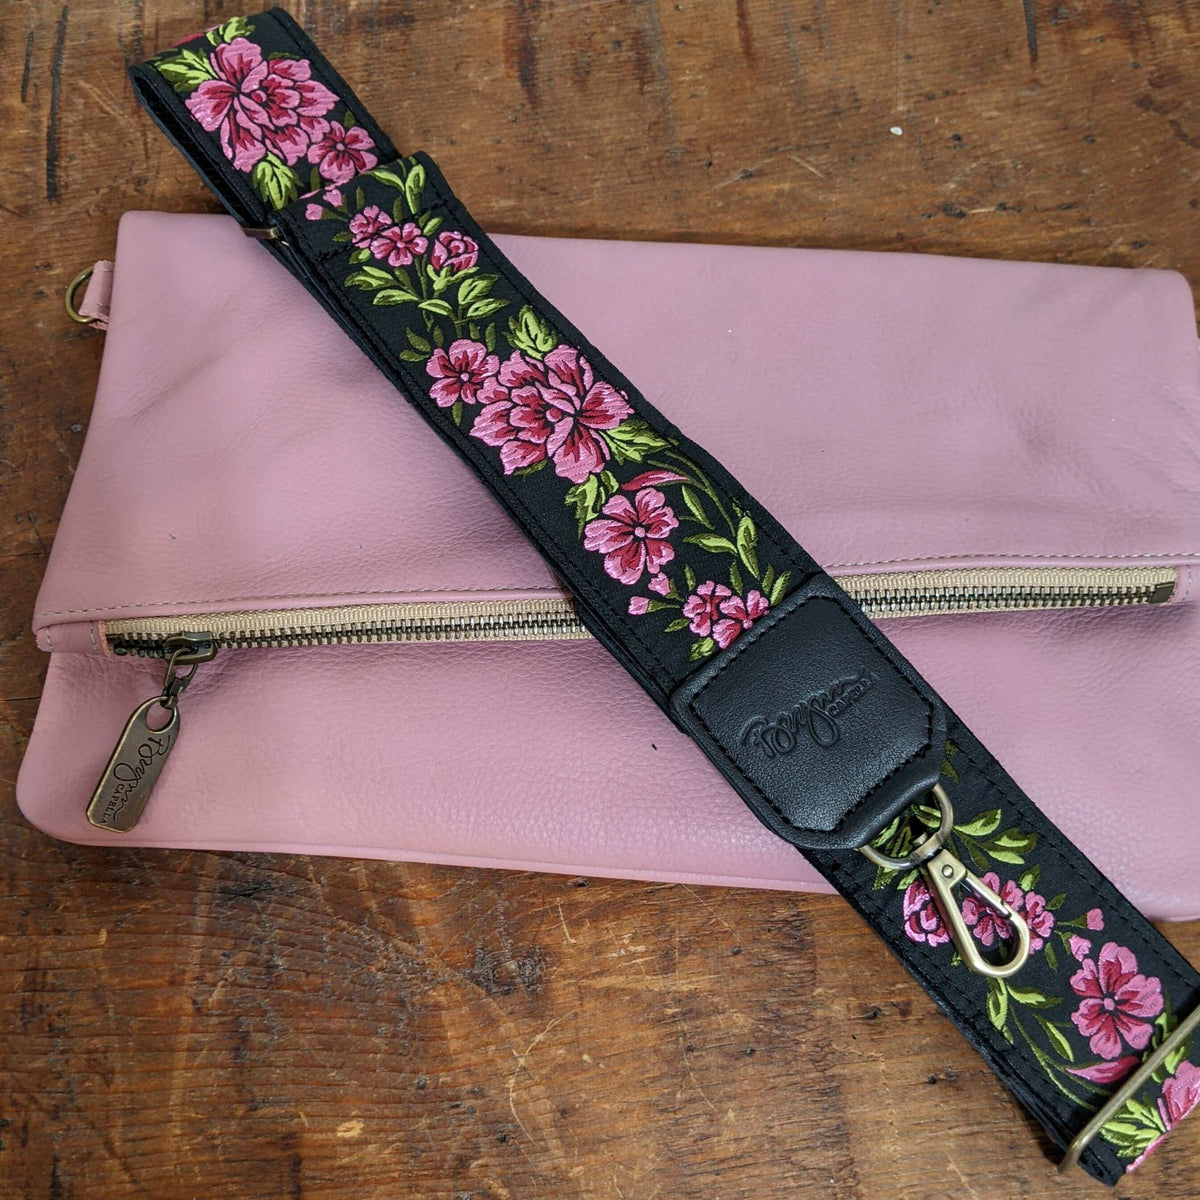 Retro Floral Woven Crossbody Guitar Style Purse Strap - Pink and Black